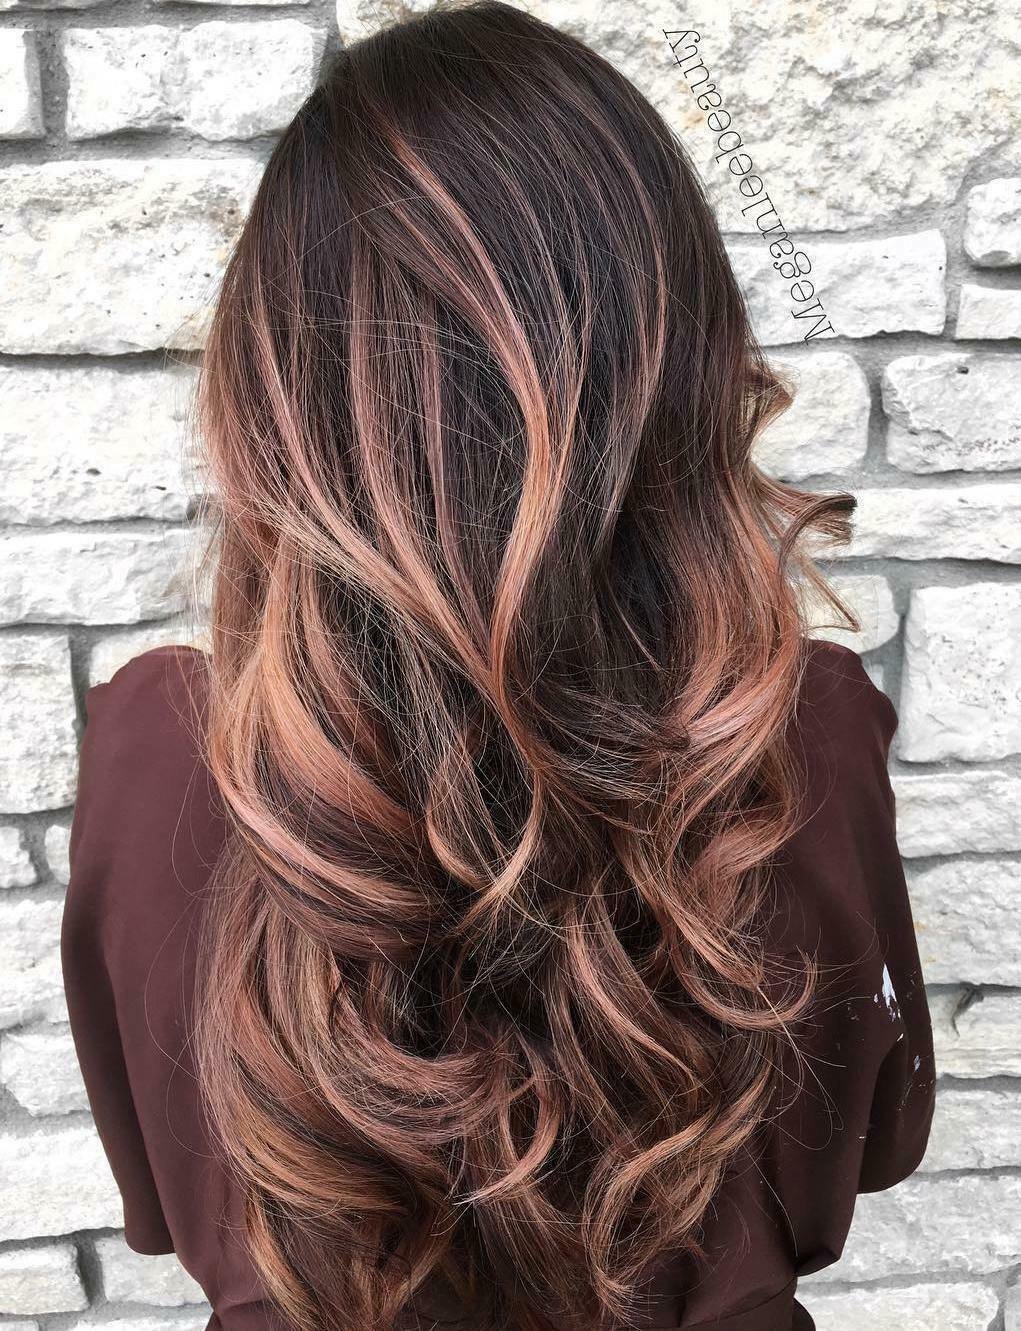 37 Brown Hair Colour Ideas And Hairstyles  golden blonde highlights